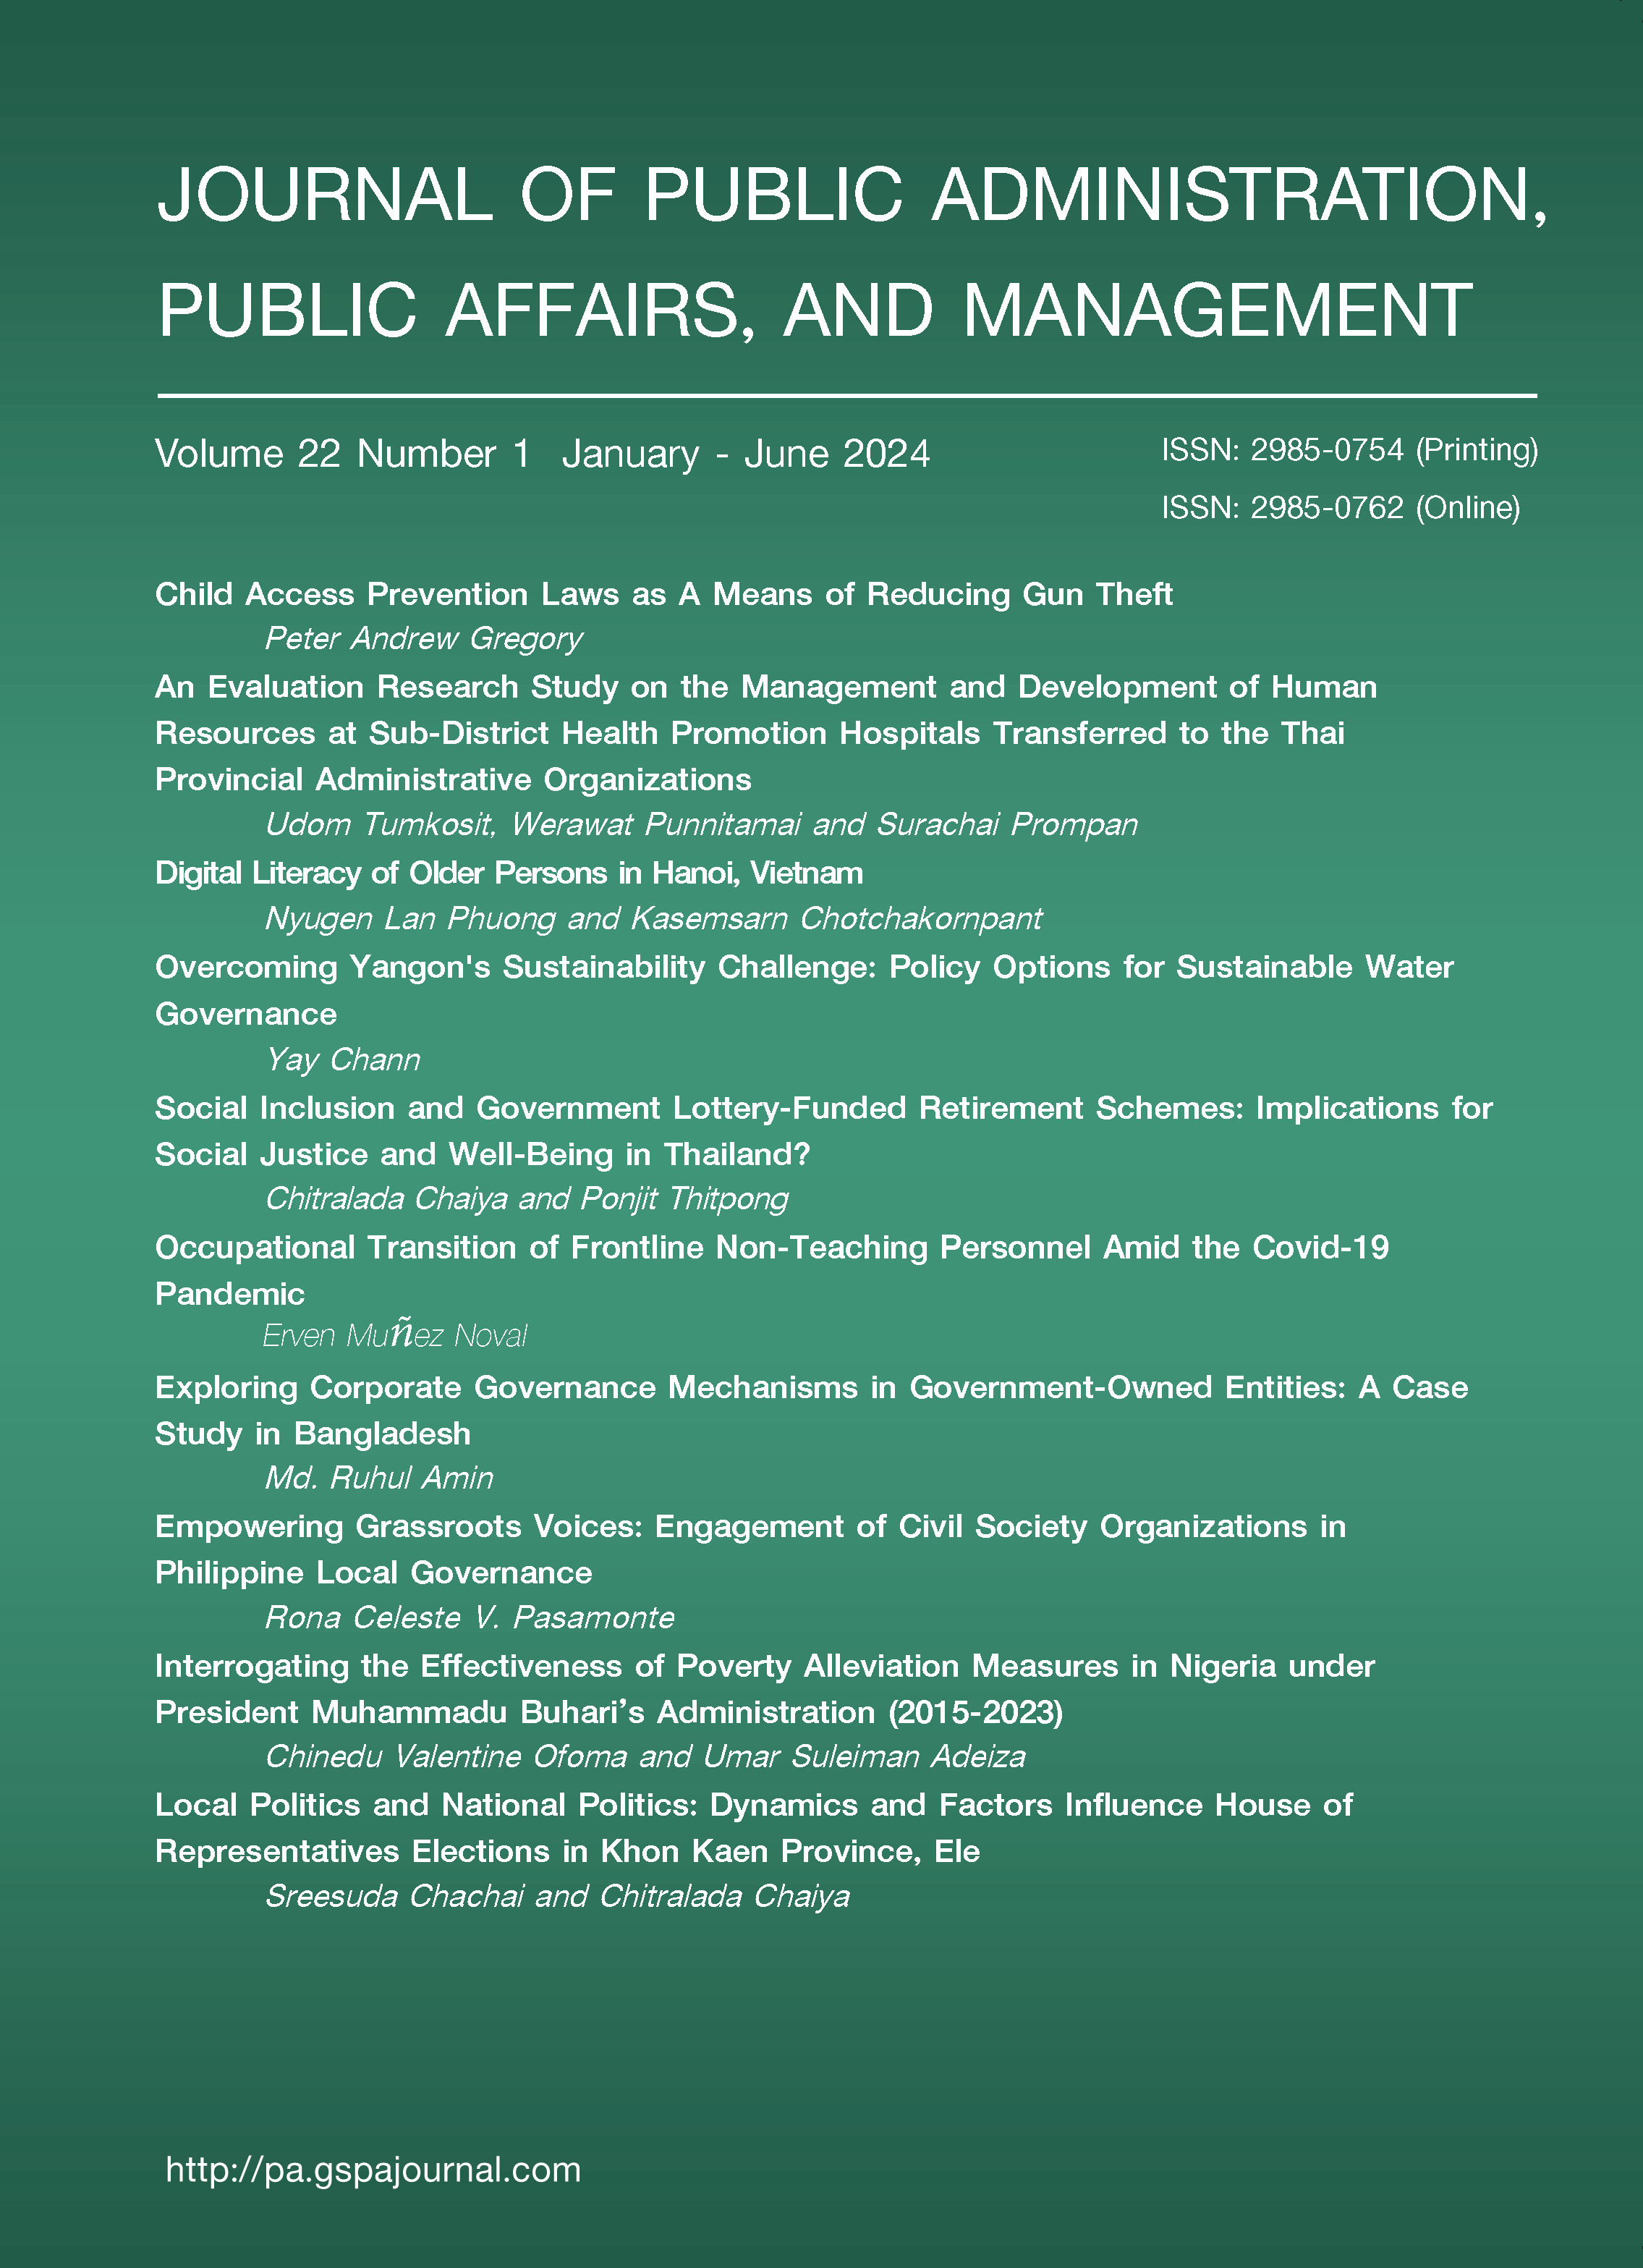 					View Vol. 22 No. 1 (2024): Journal of Public Administration, Public Affairs, and Management Volume 22 Number 1
				